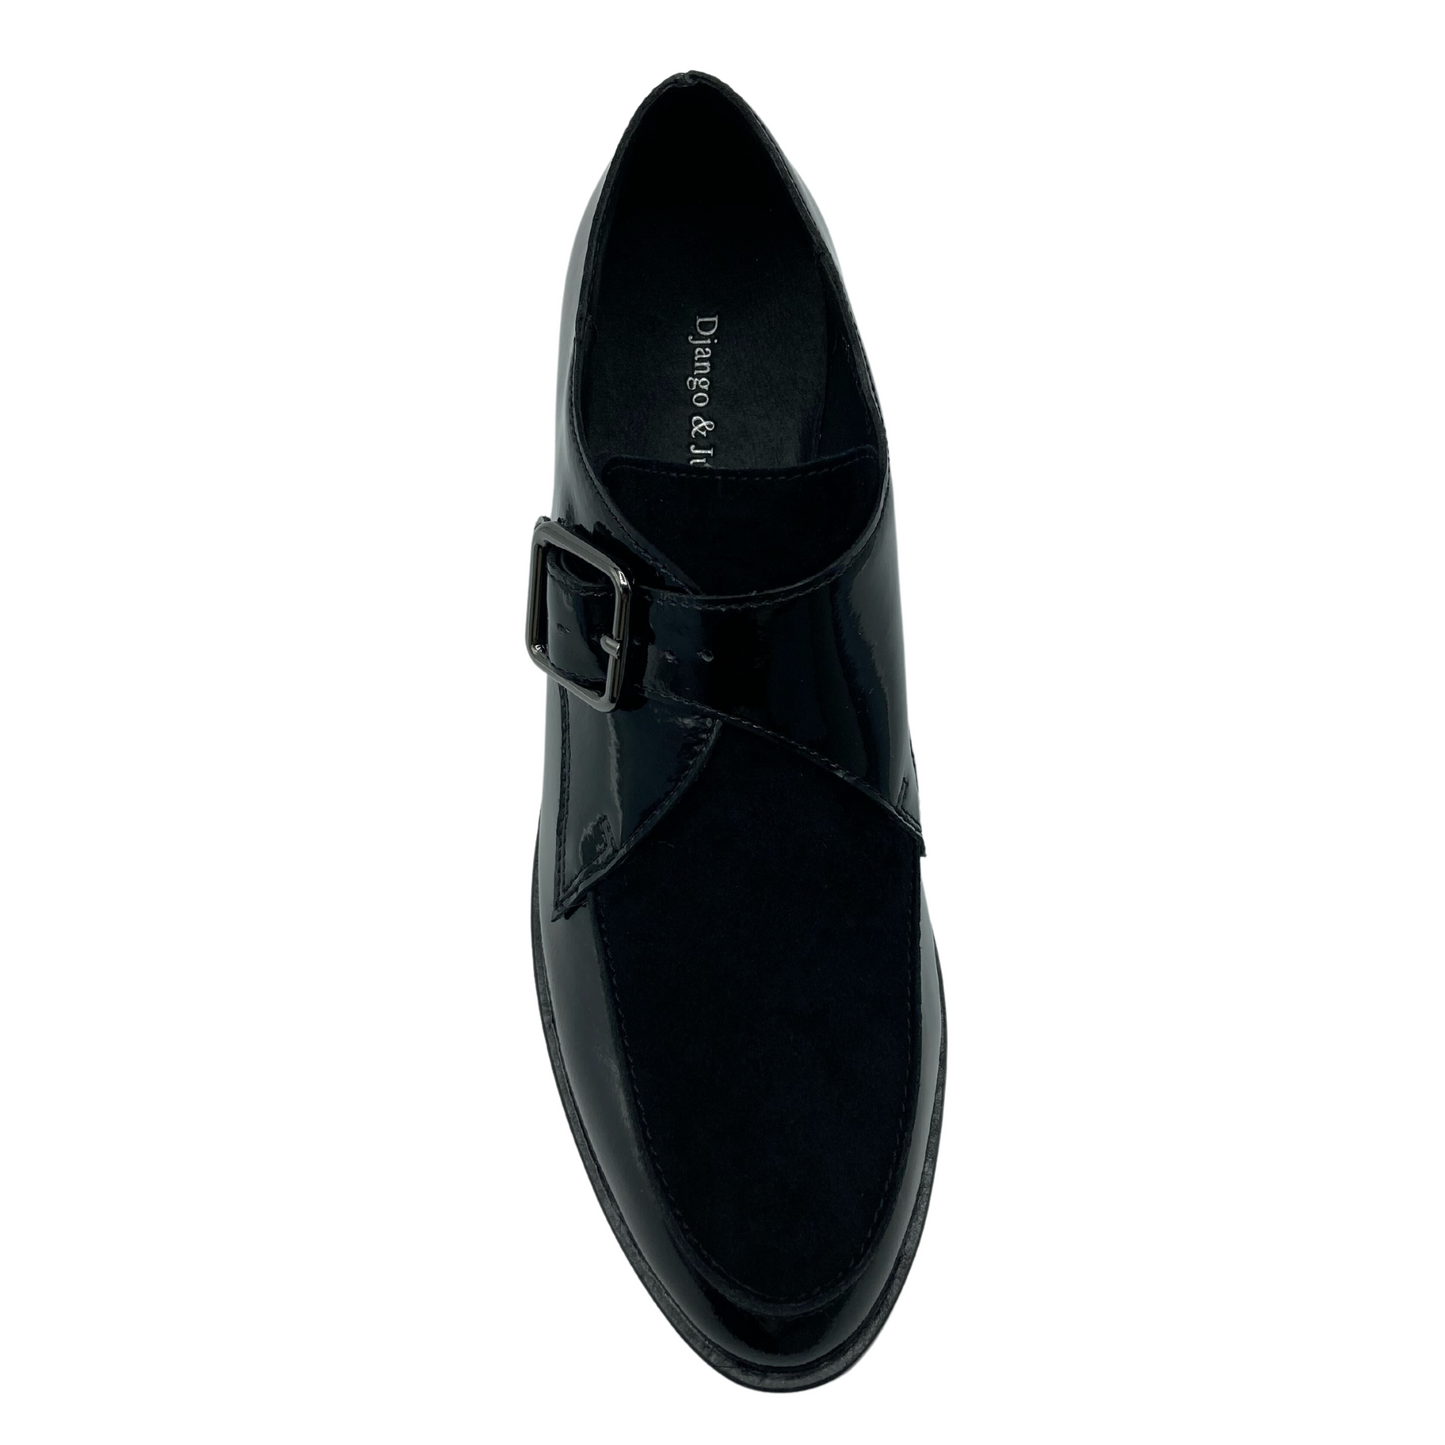 Top view of black patent and suede loafer with silver buckle detail and pointed toe